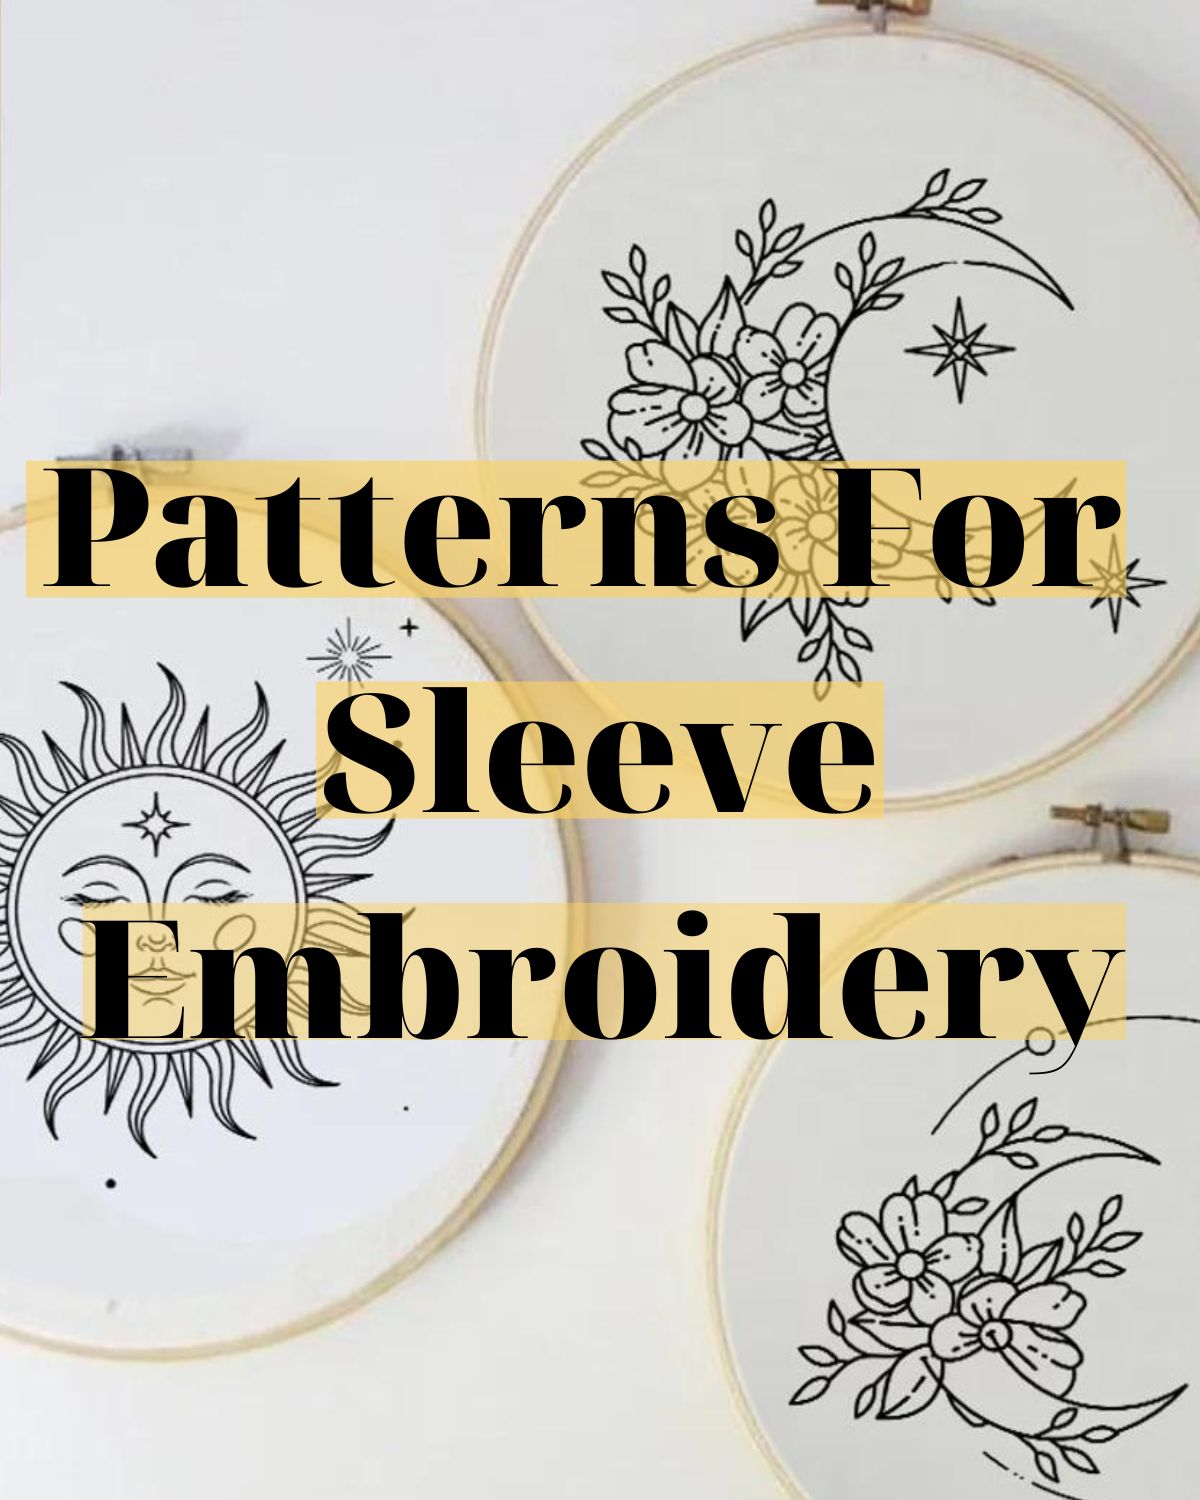 Embroidery patterns on hoops. Celestial designs